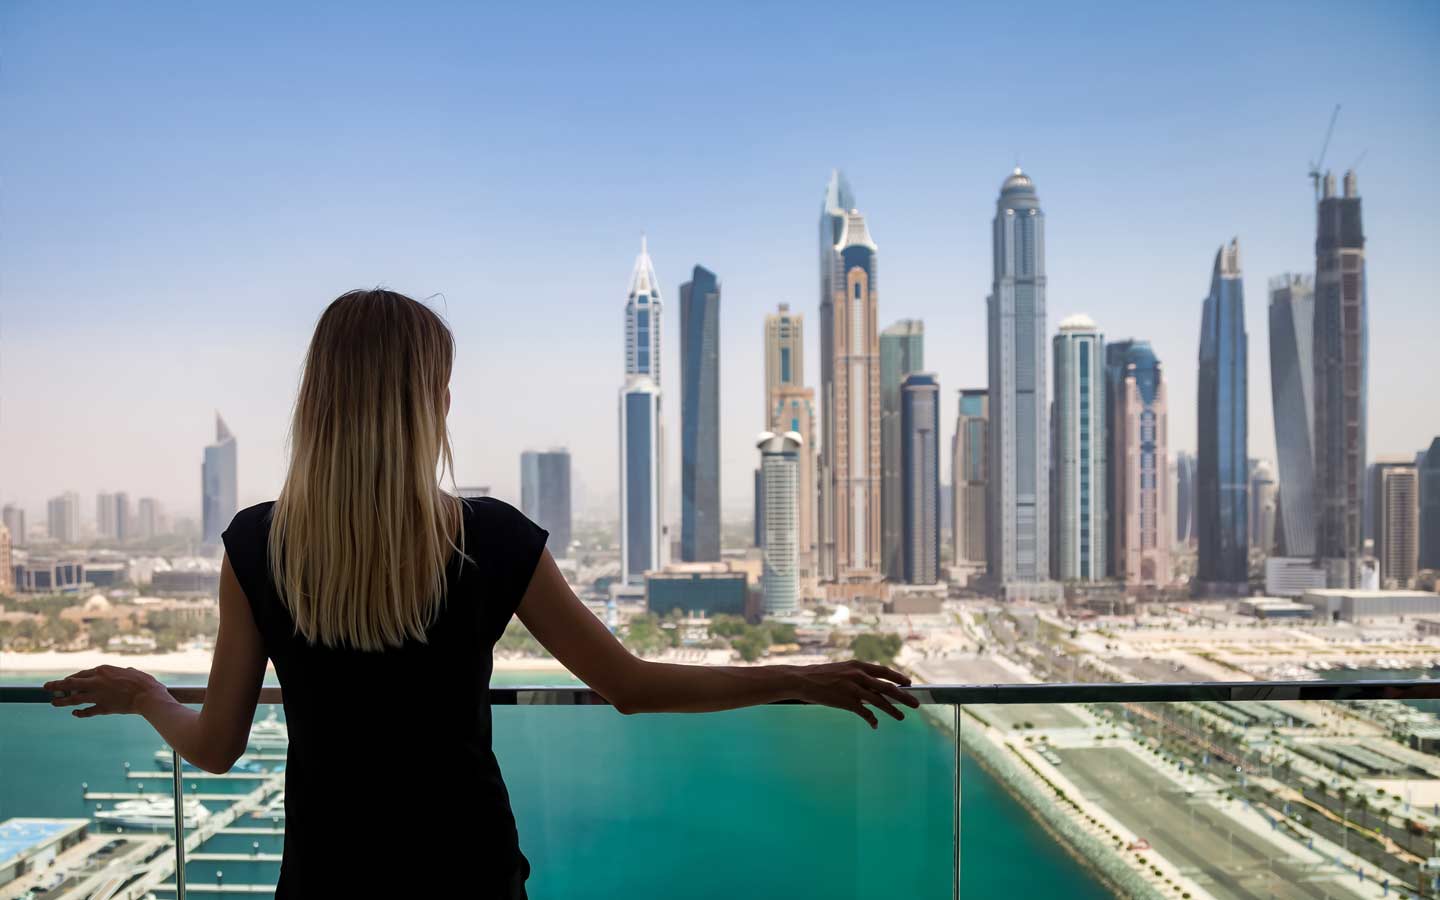 invest and live in dubai marina and avail the many perks that follow